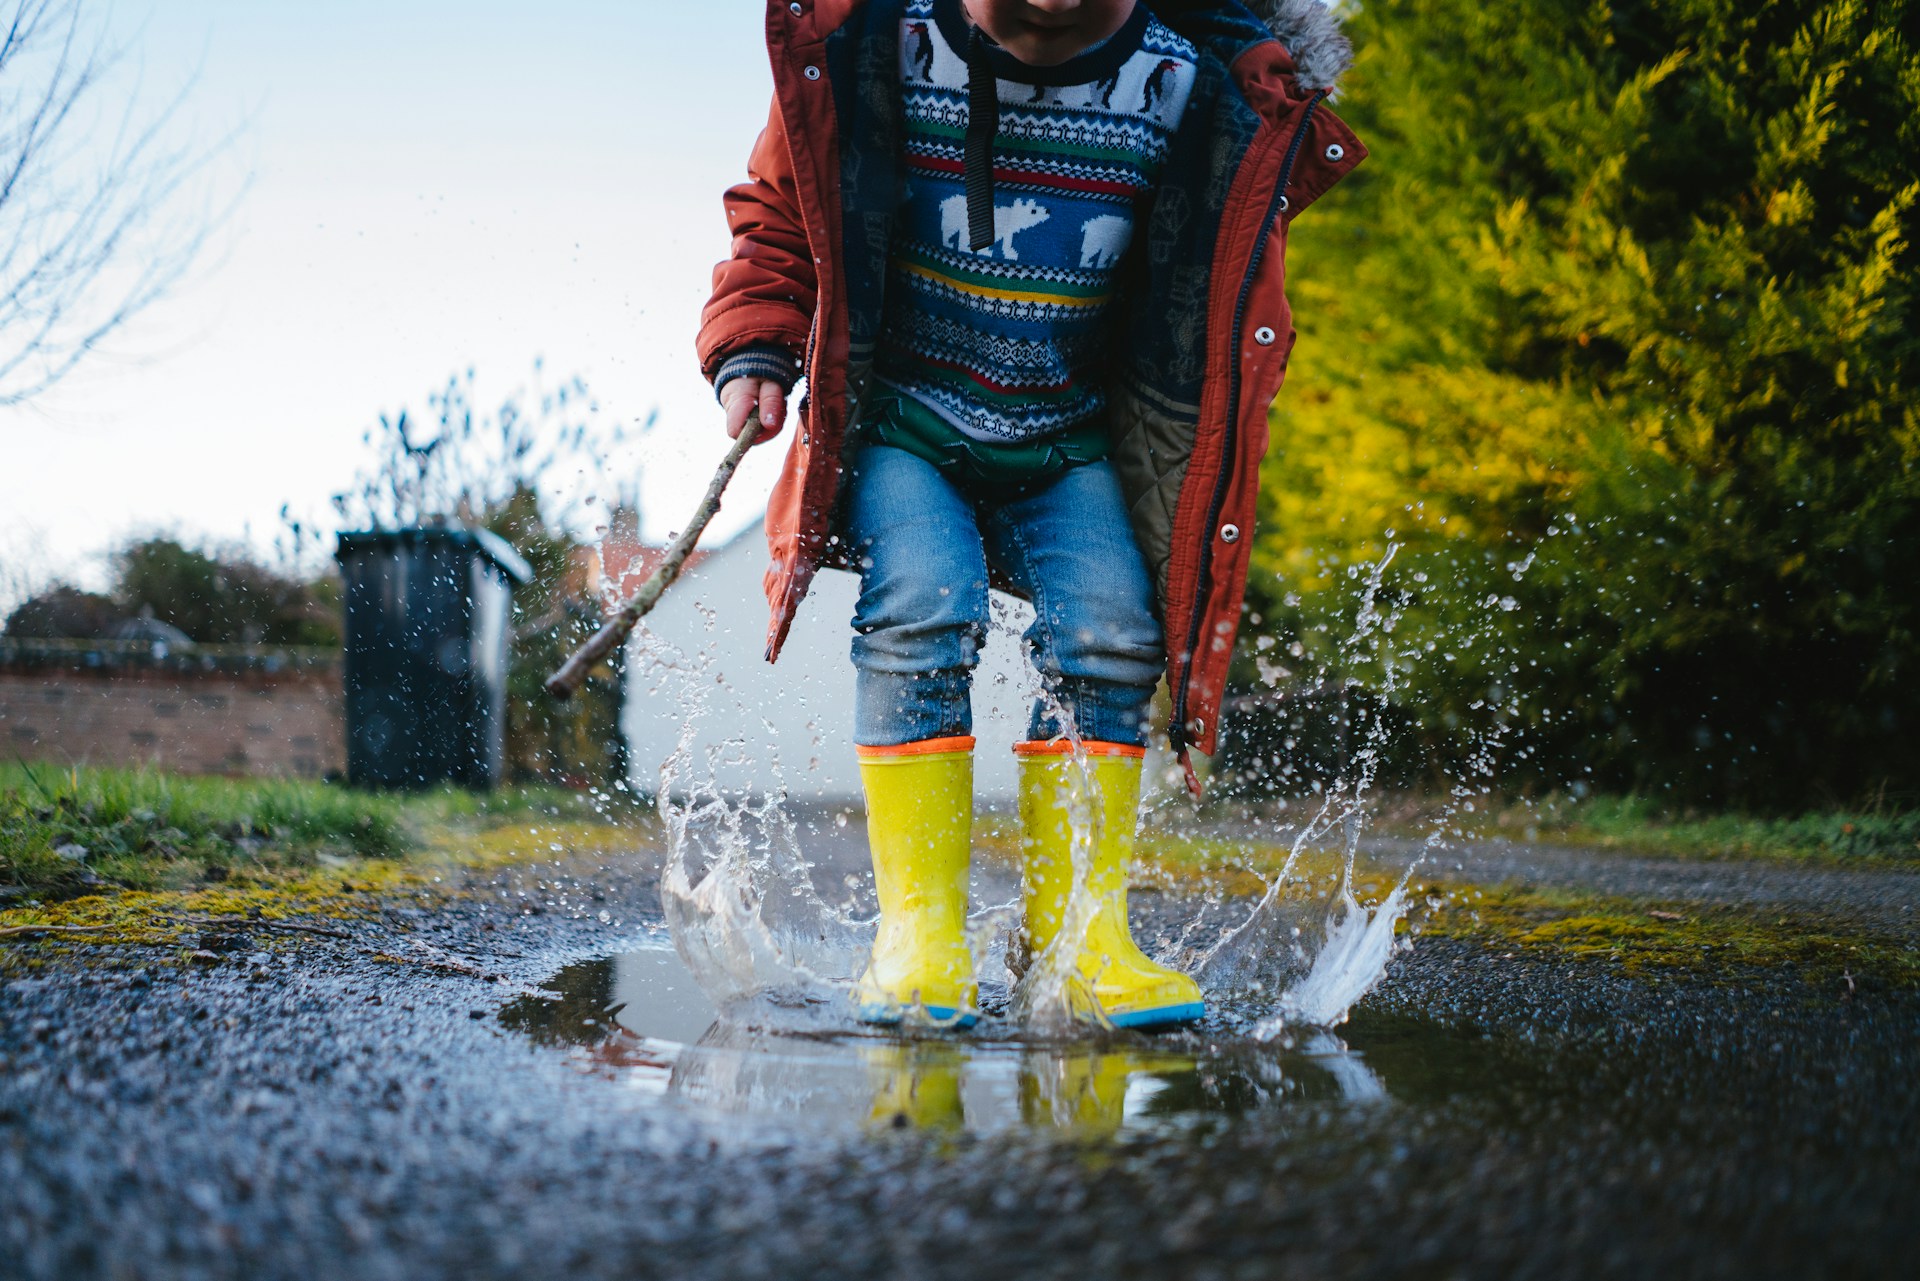 Go Outside and Splash in Puddles